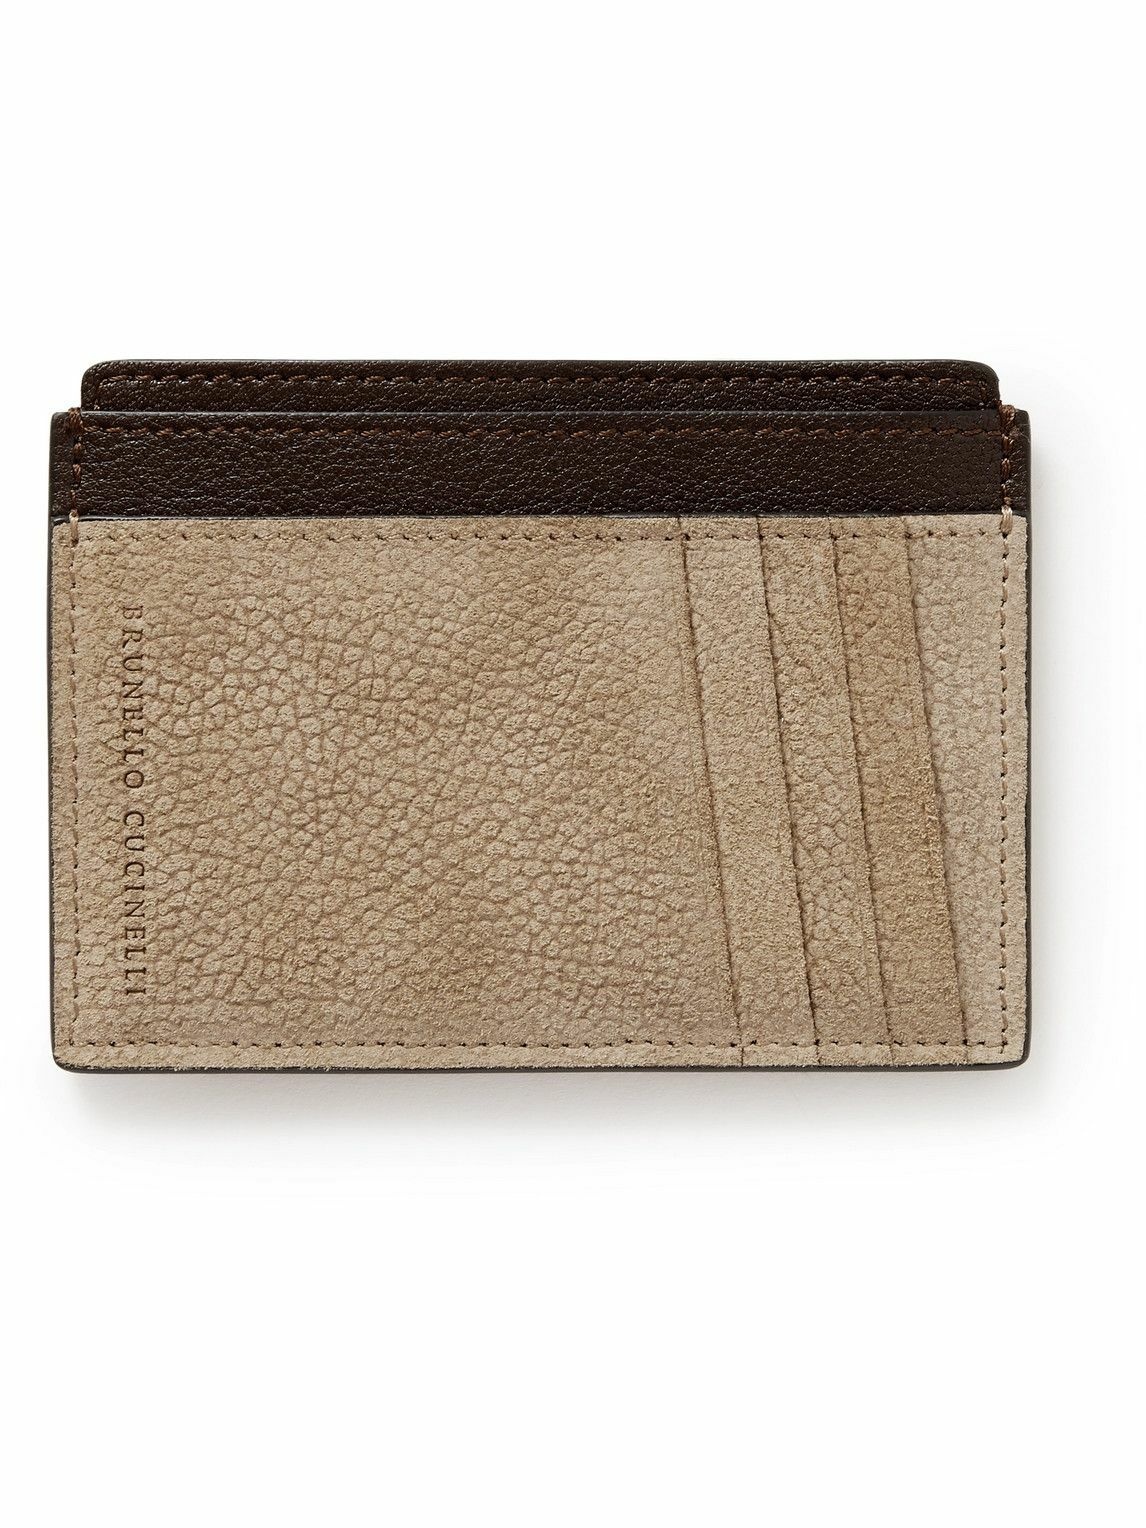 Photo: Brunello Cucinelli - Textured Suede and Full-Grain Leather Cardholder